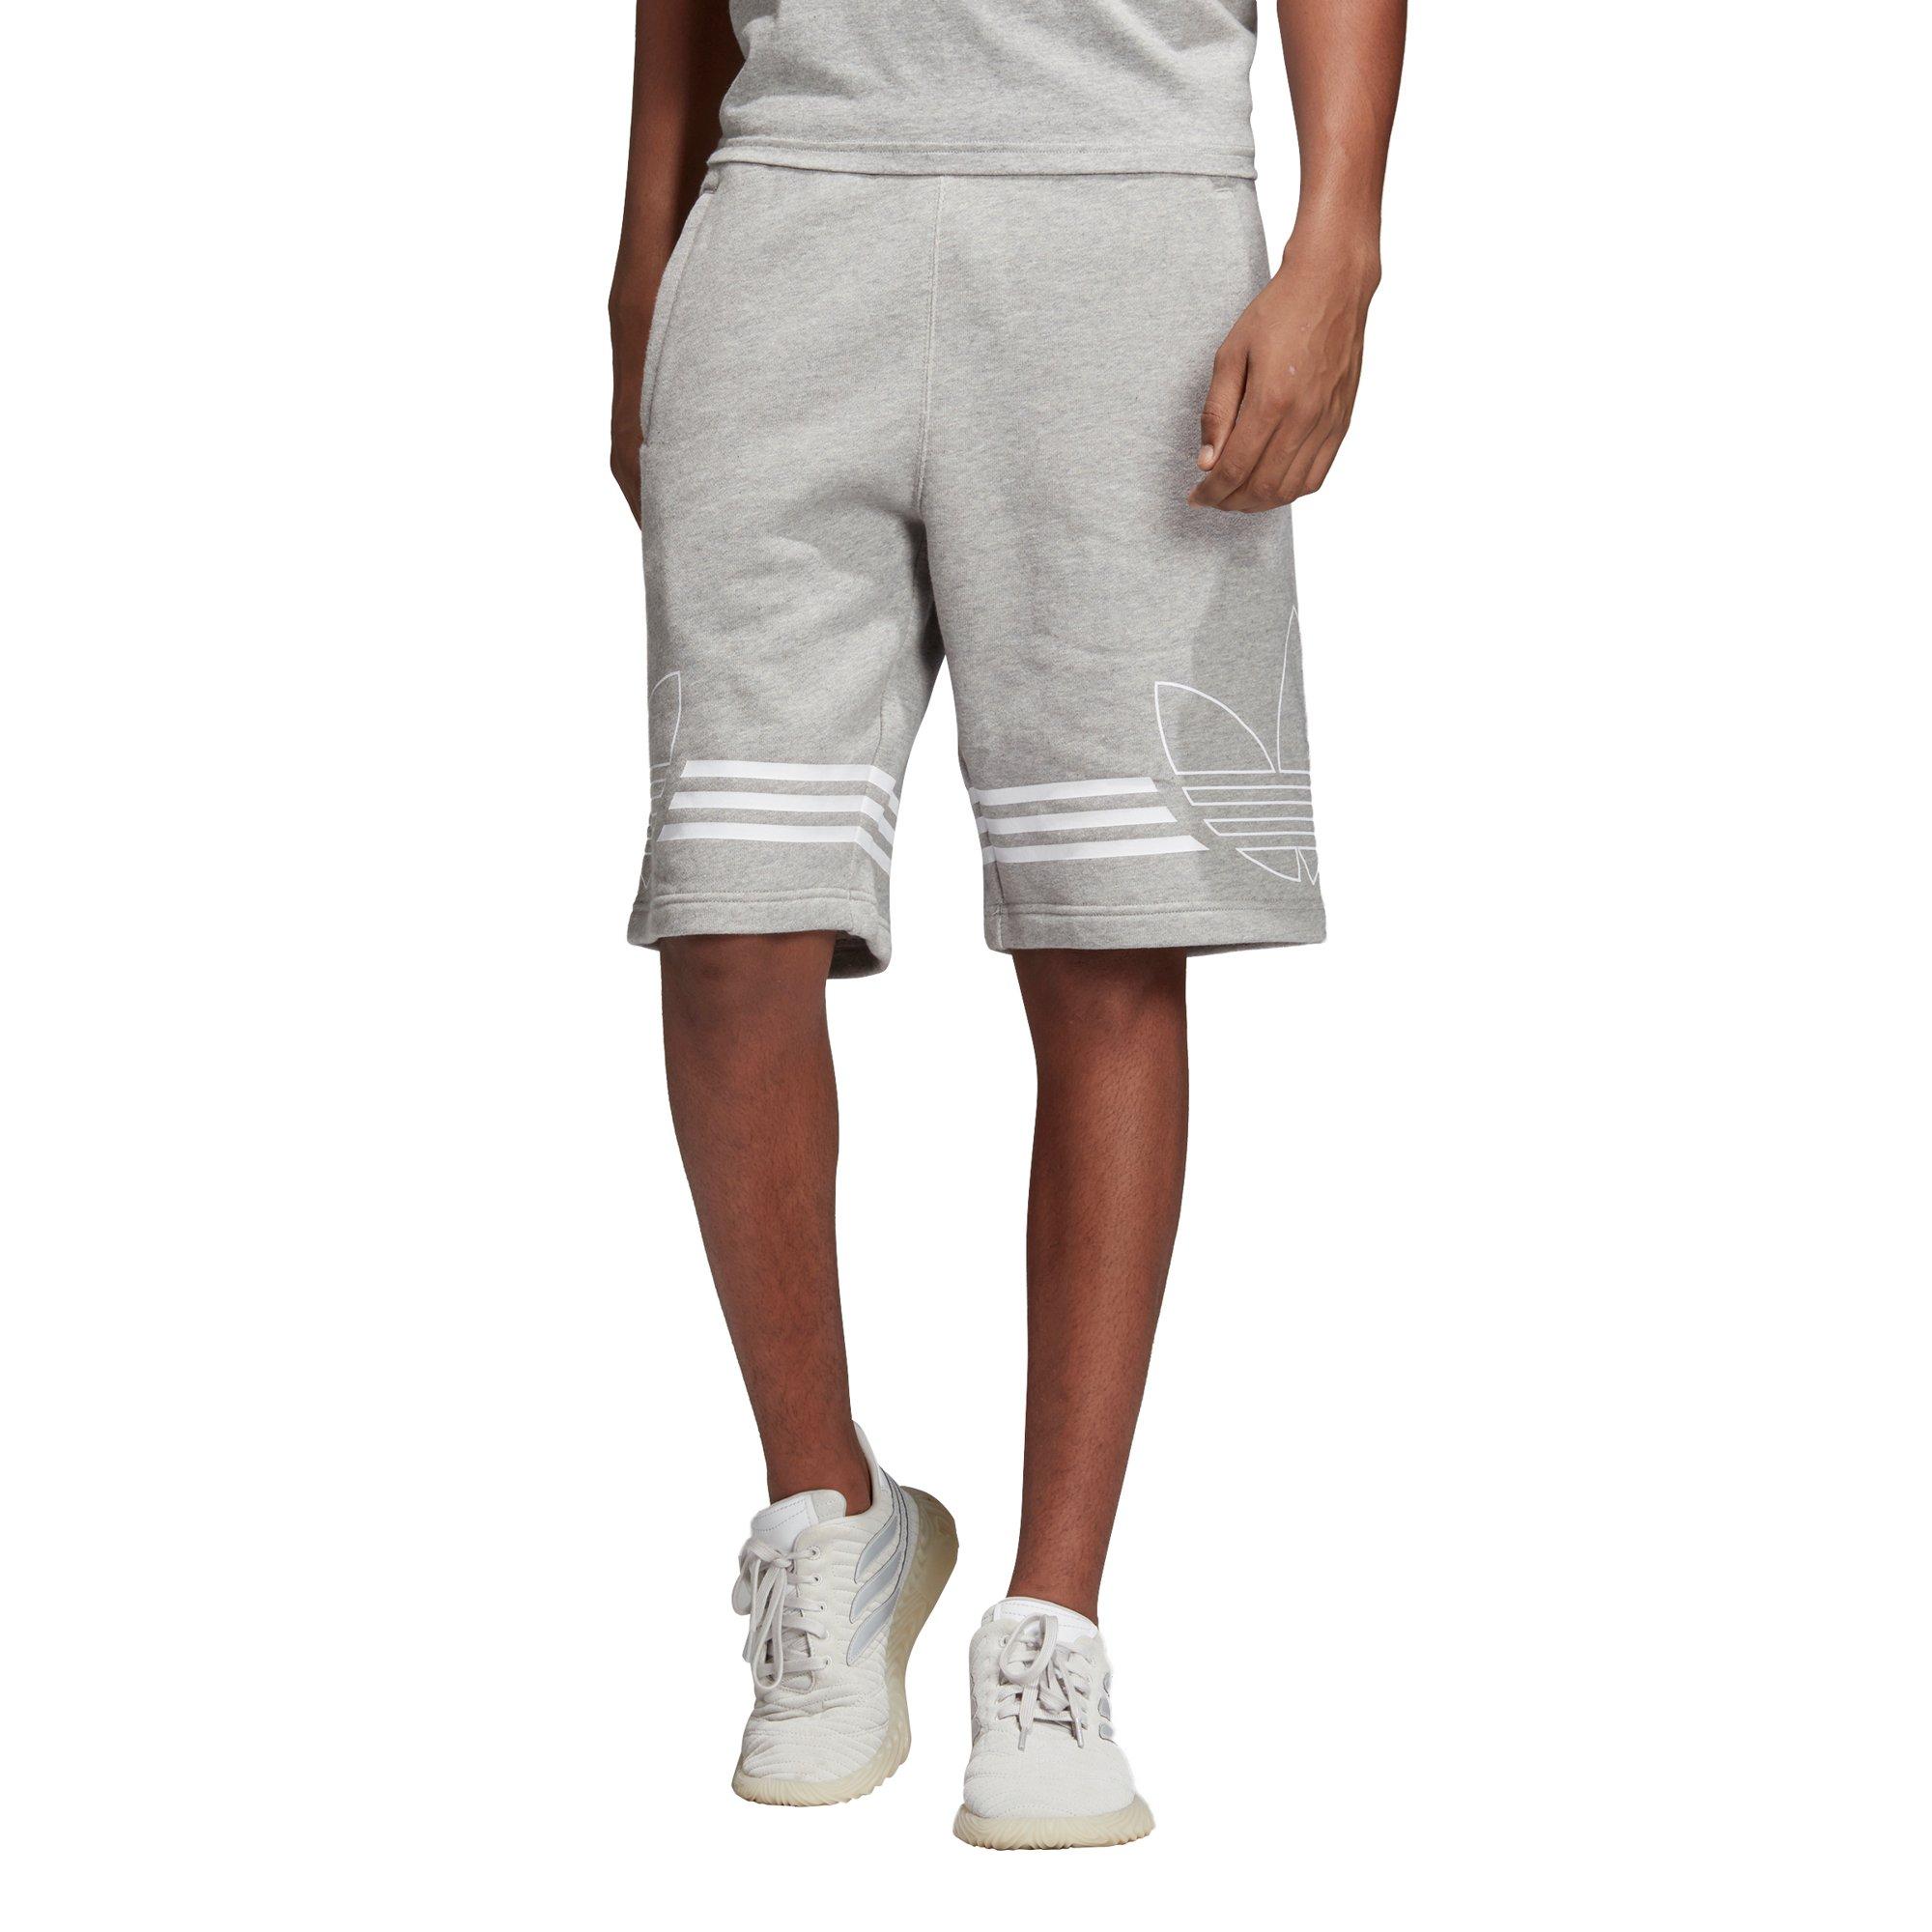 outline shorts adidas